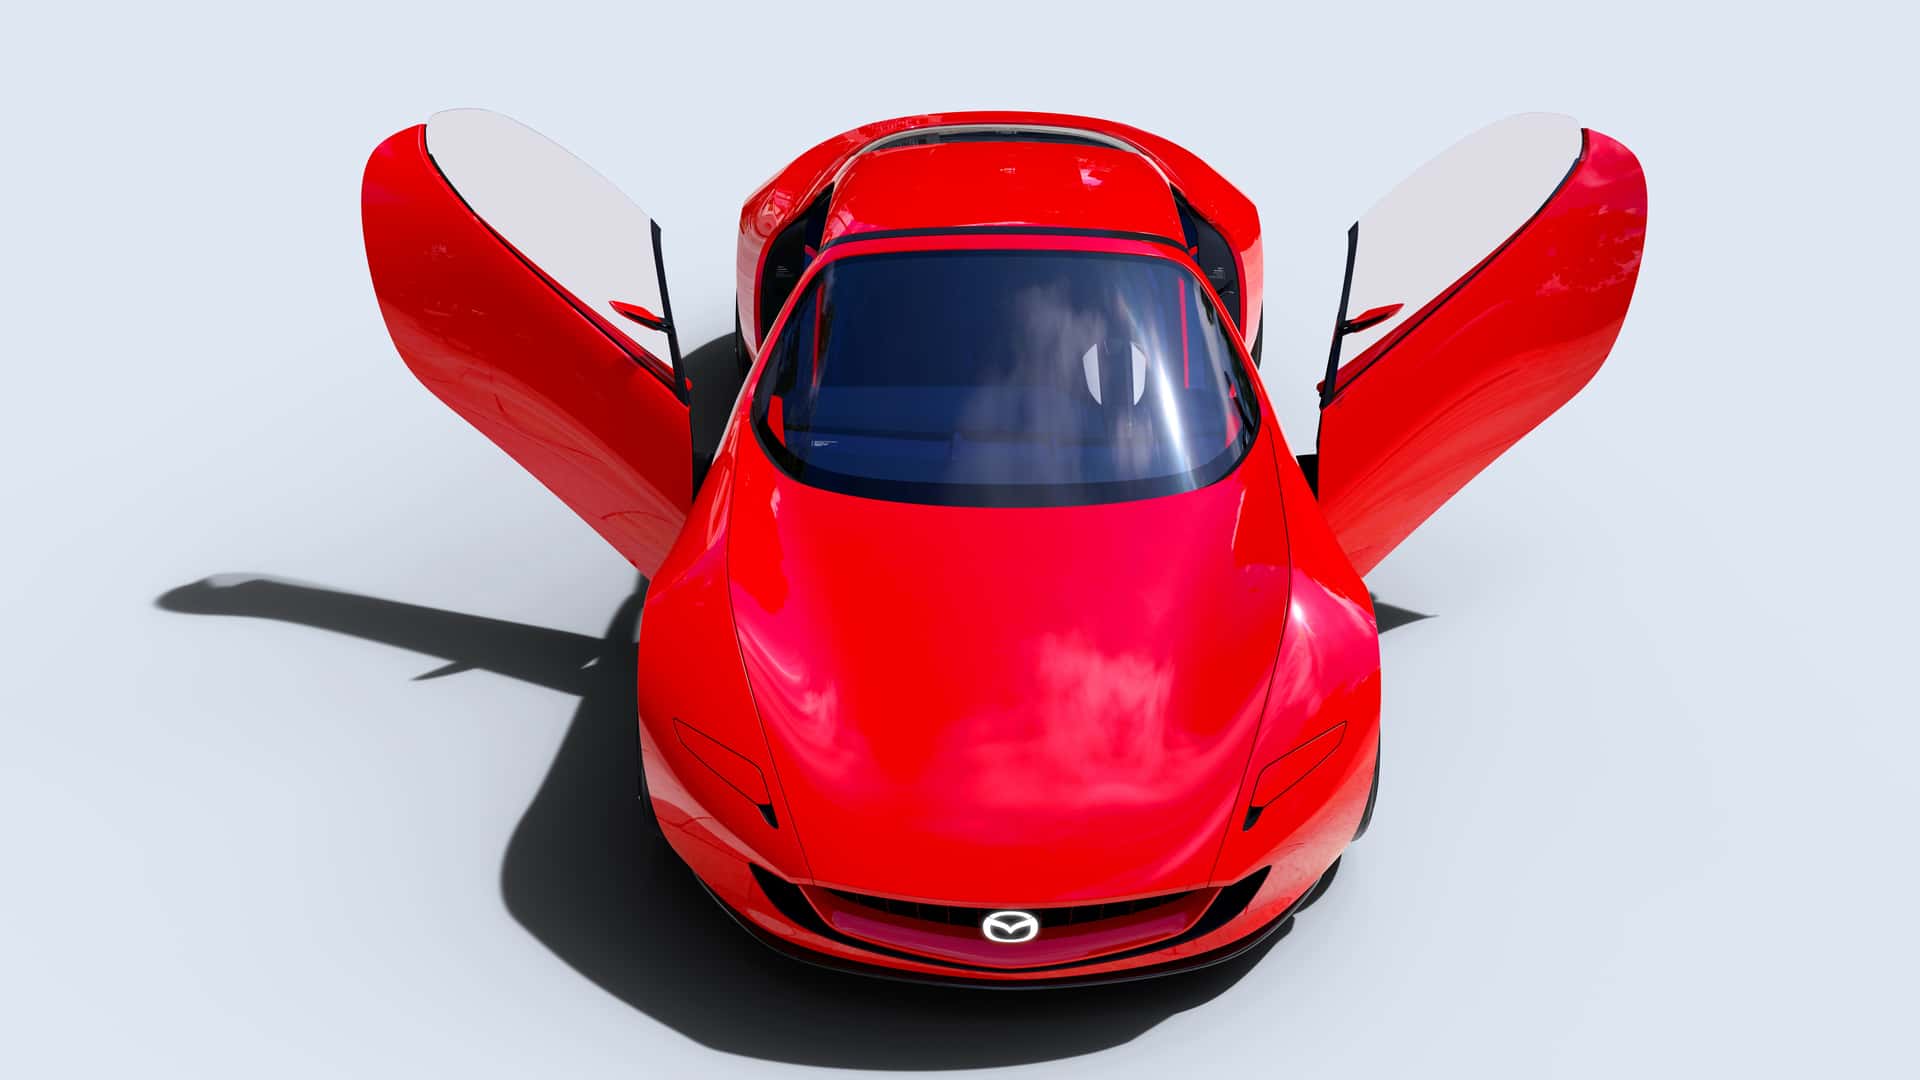 mazda-iconic-sp-concept-exterior-front-view.jpg